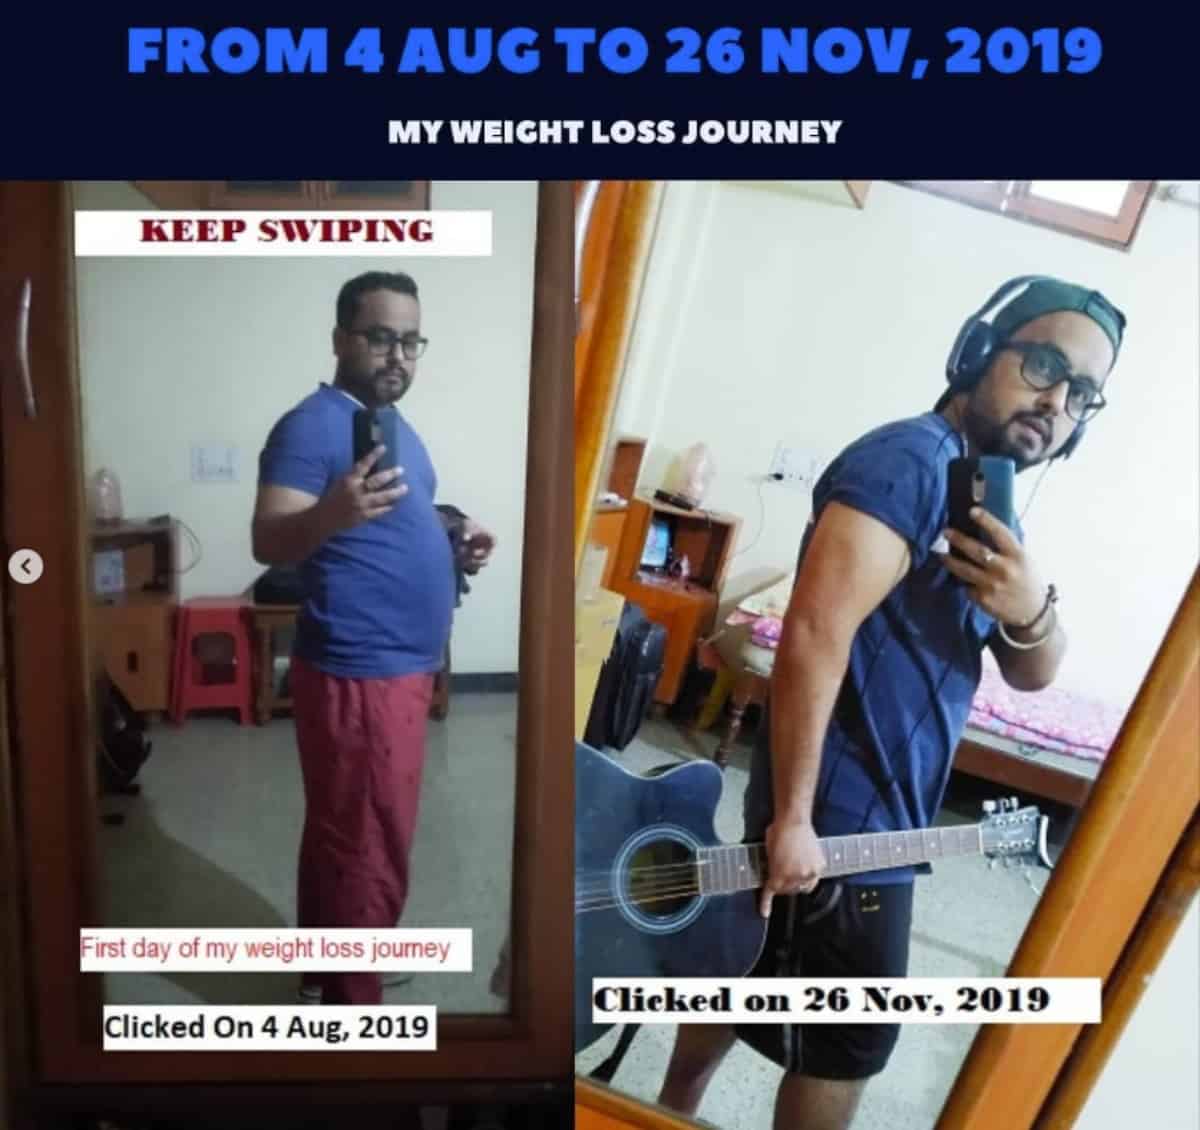 Anubhav weight loss transformation before and after.